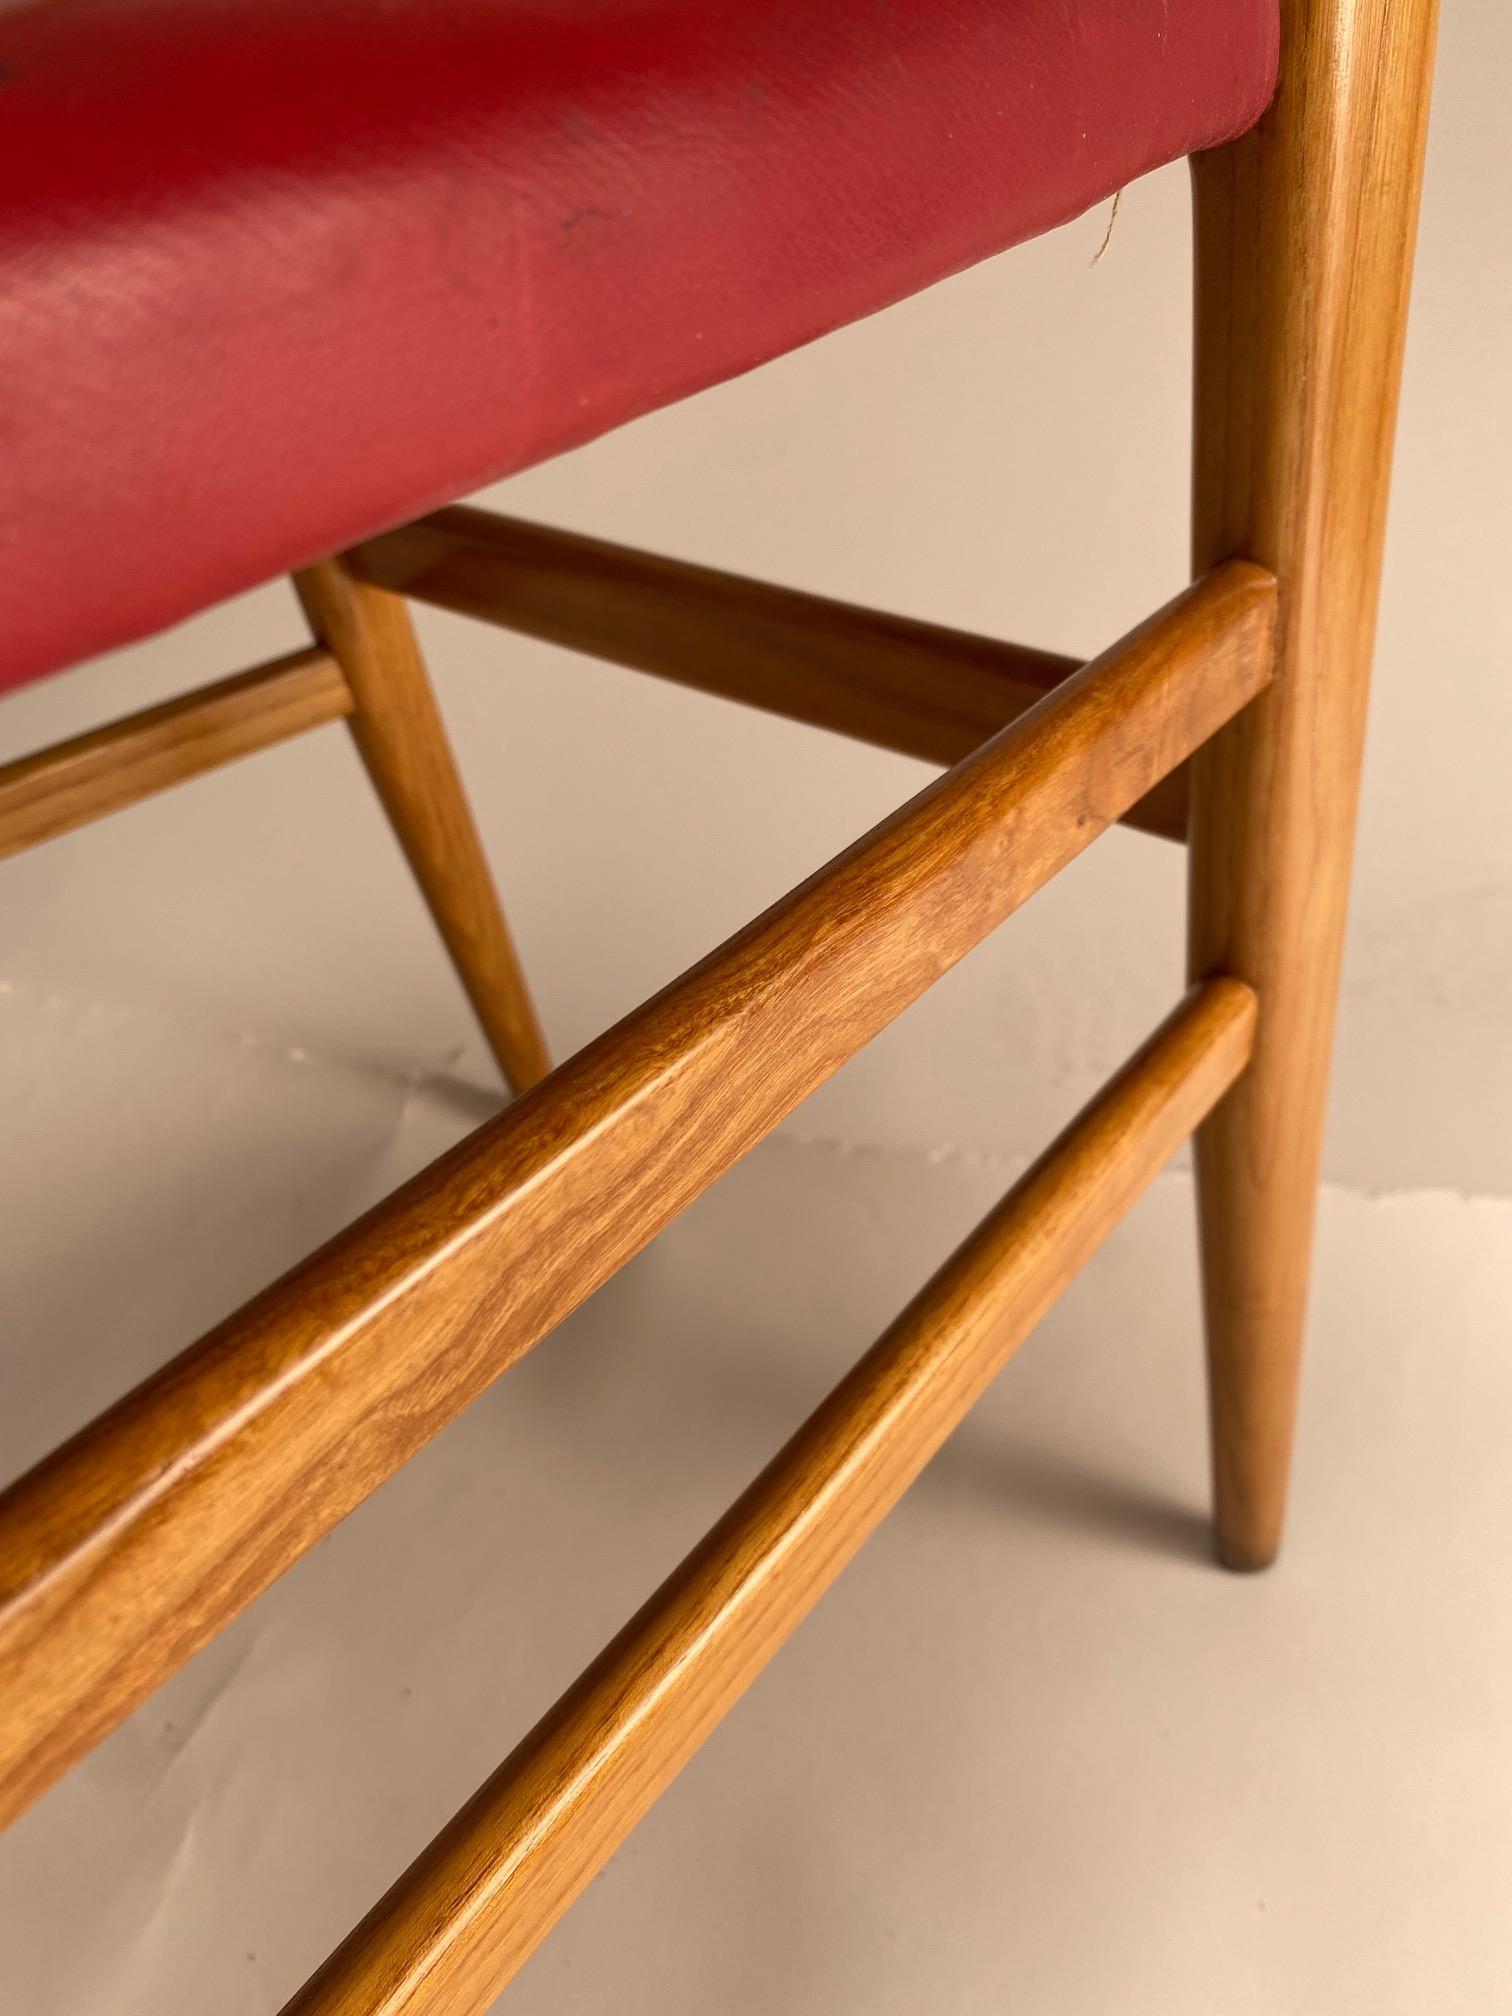 Pair of Leggera chairs in light wood, Gio Ponti, Cassina  (First Edition) For Sale 1